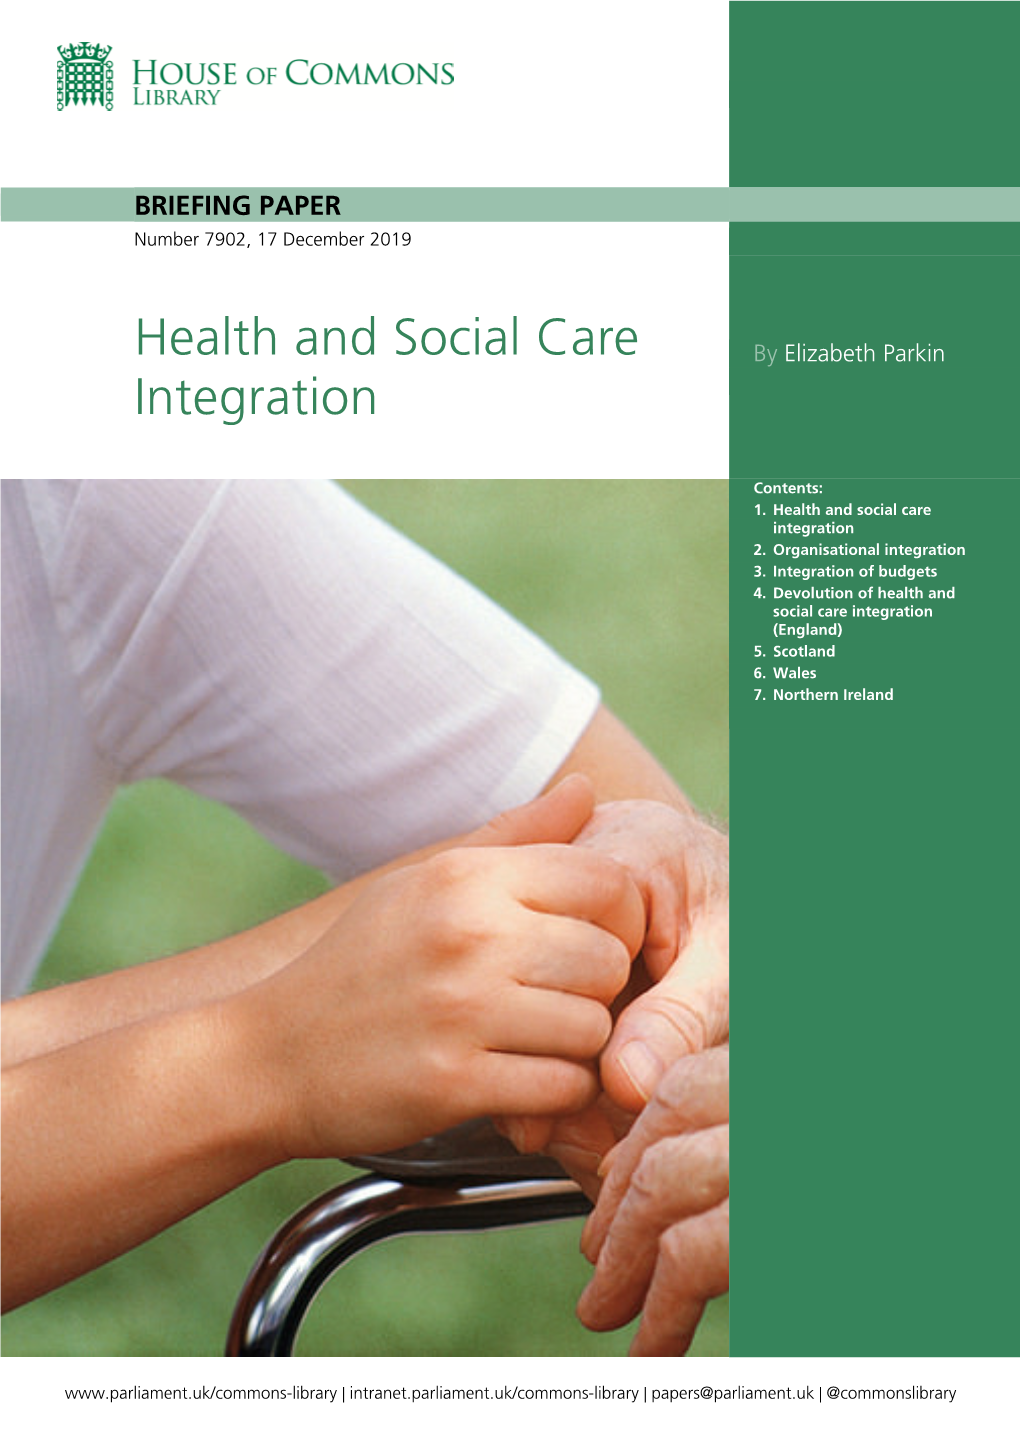 Health and Social Care Integration 2